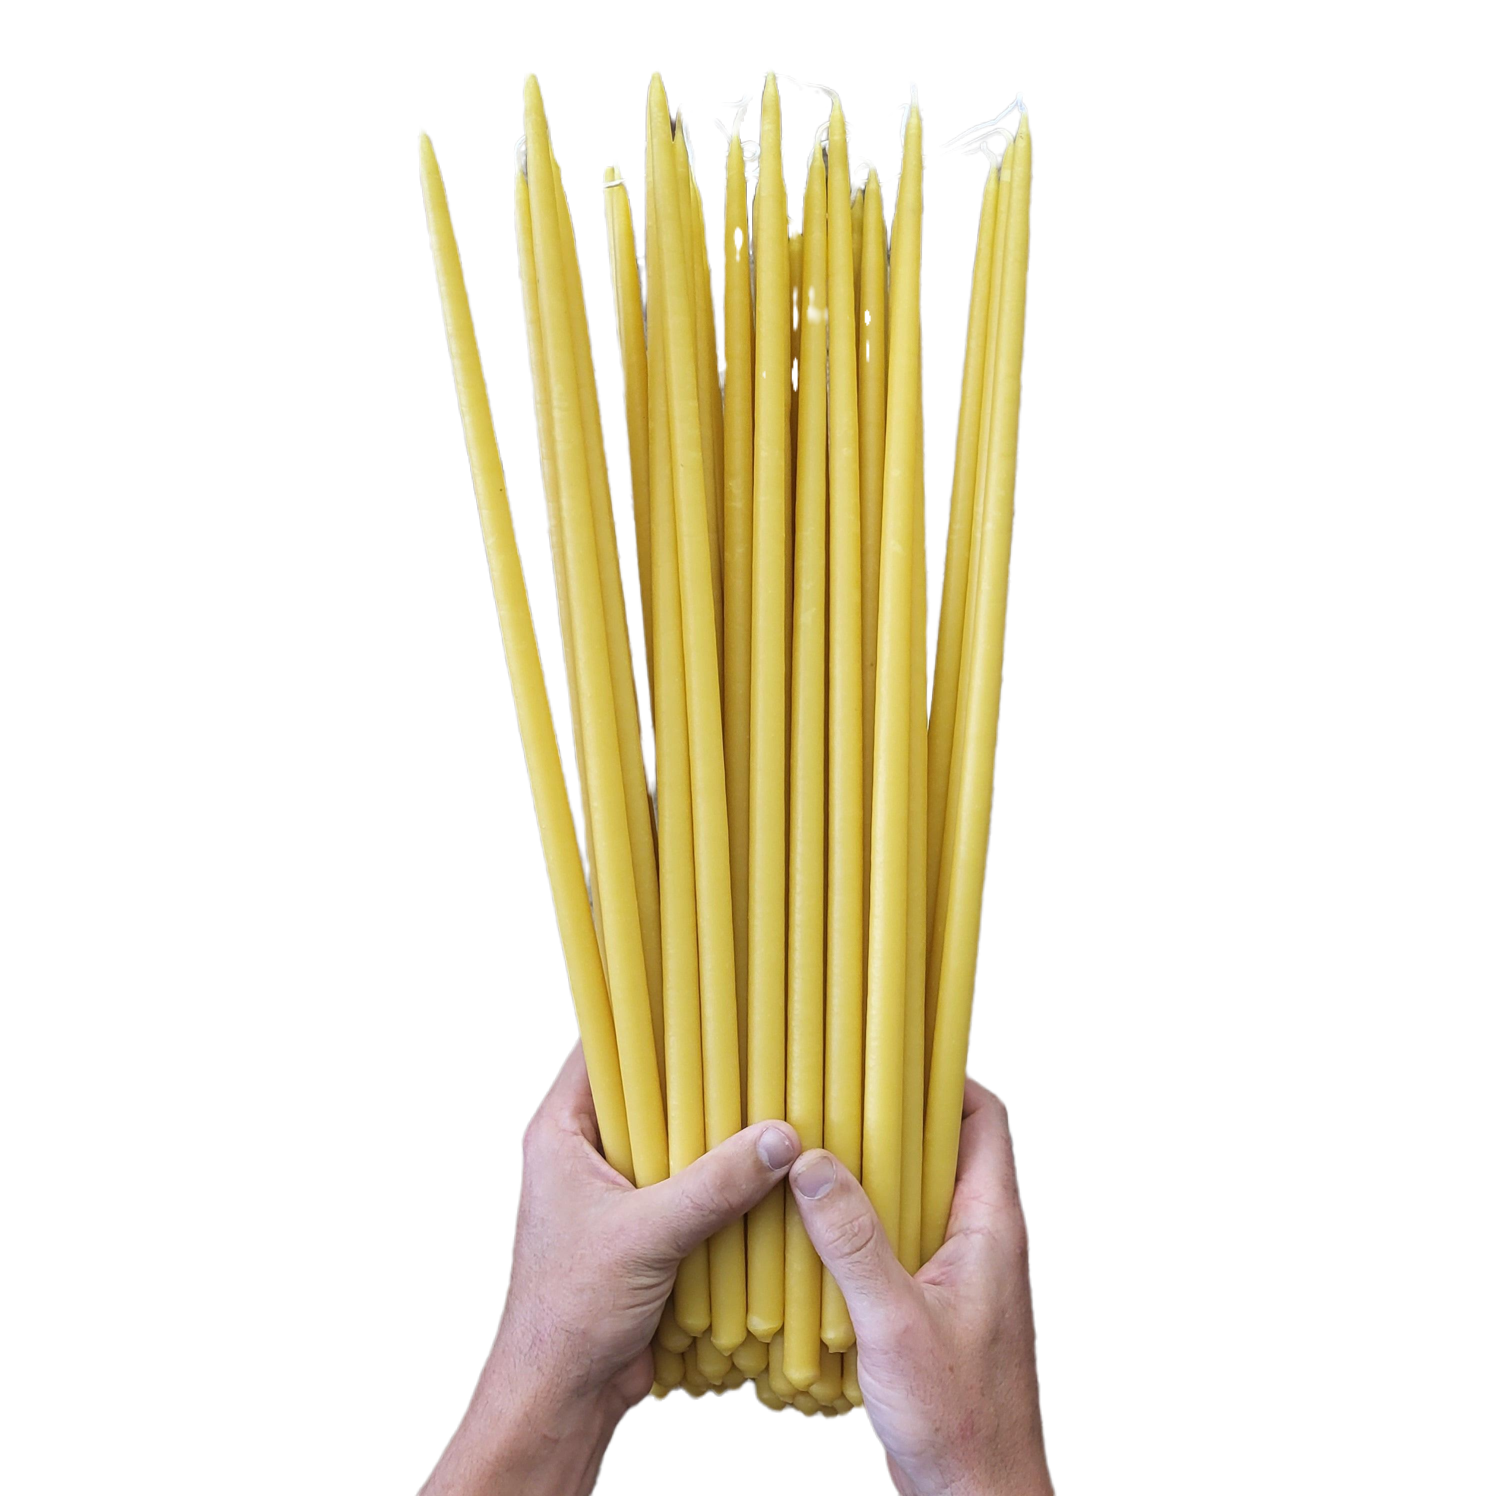 100% Pure Natural Beeswax Candles Handmade Dipped Thin Taper